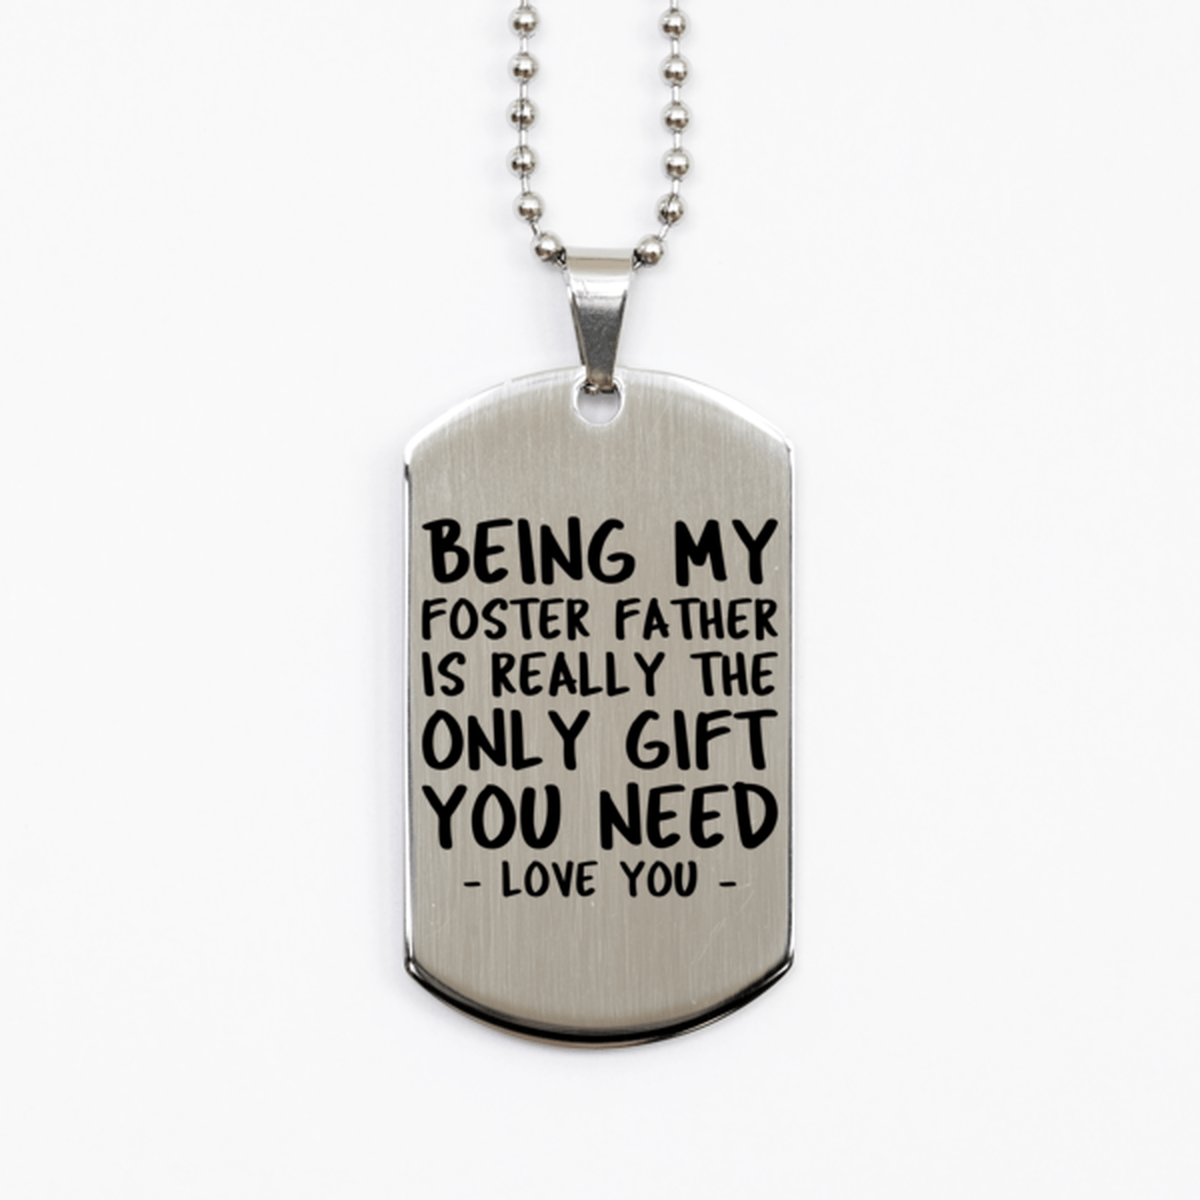 Funny Foster Father Silver Dog Tag Necklace, Being My Foster Father Is Really the Only Gift You Need, Best Birthday Gifts for Foster Father